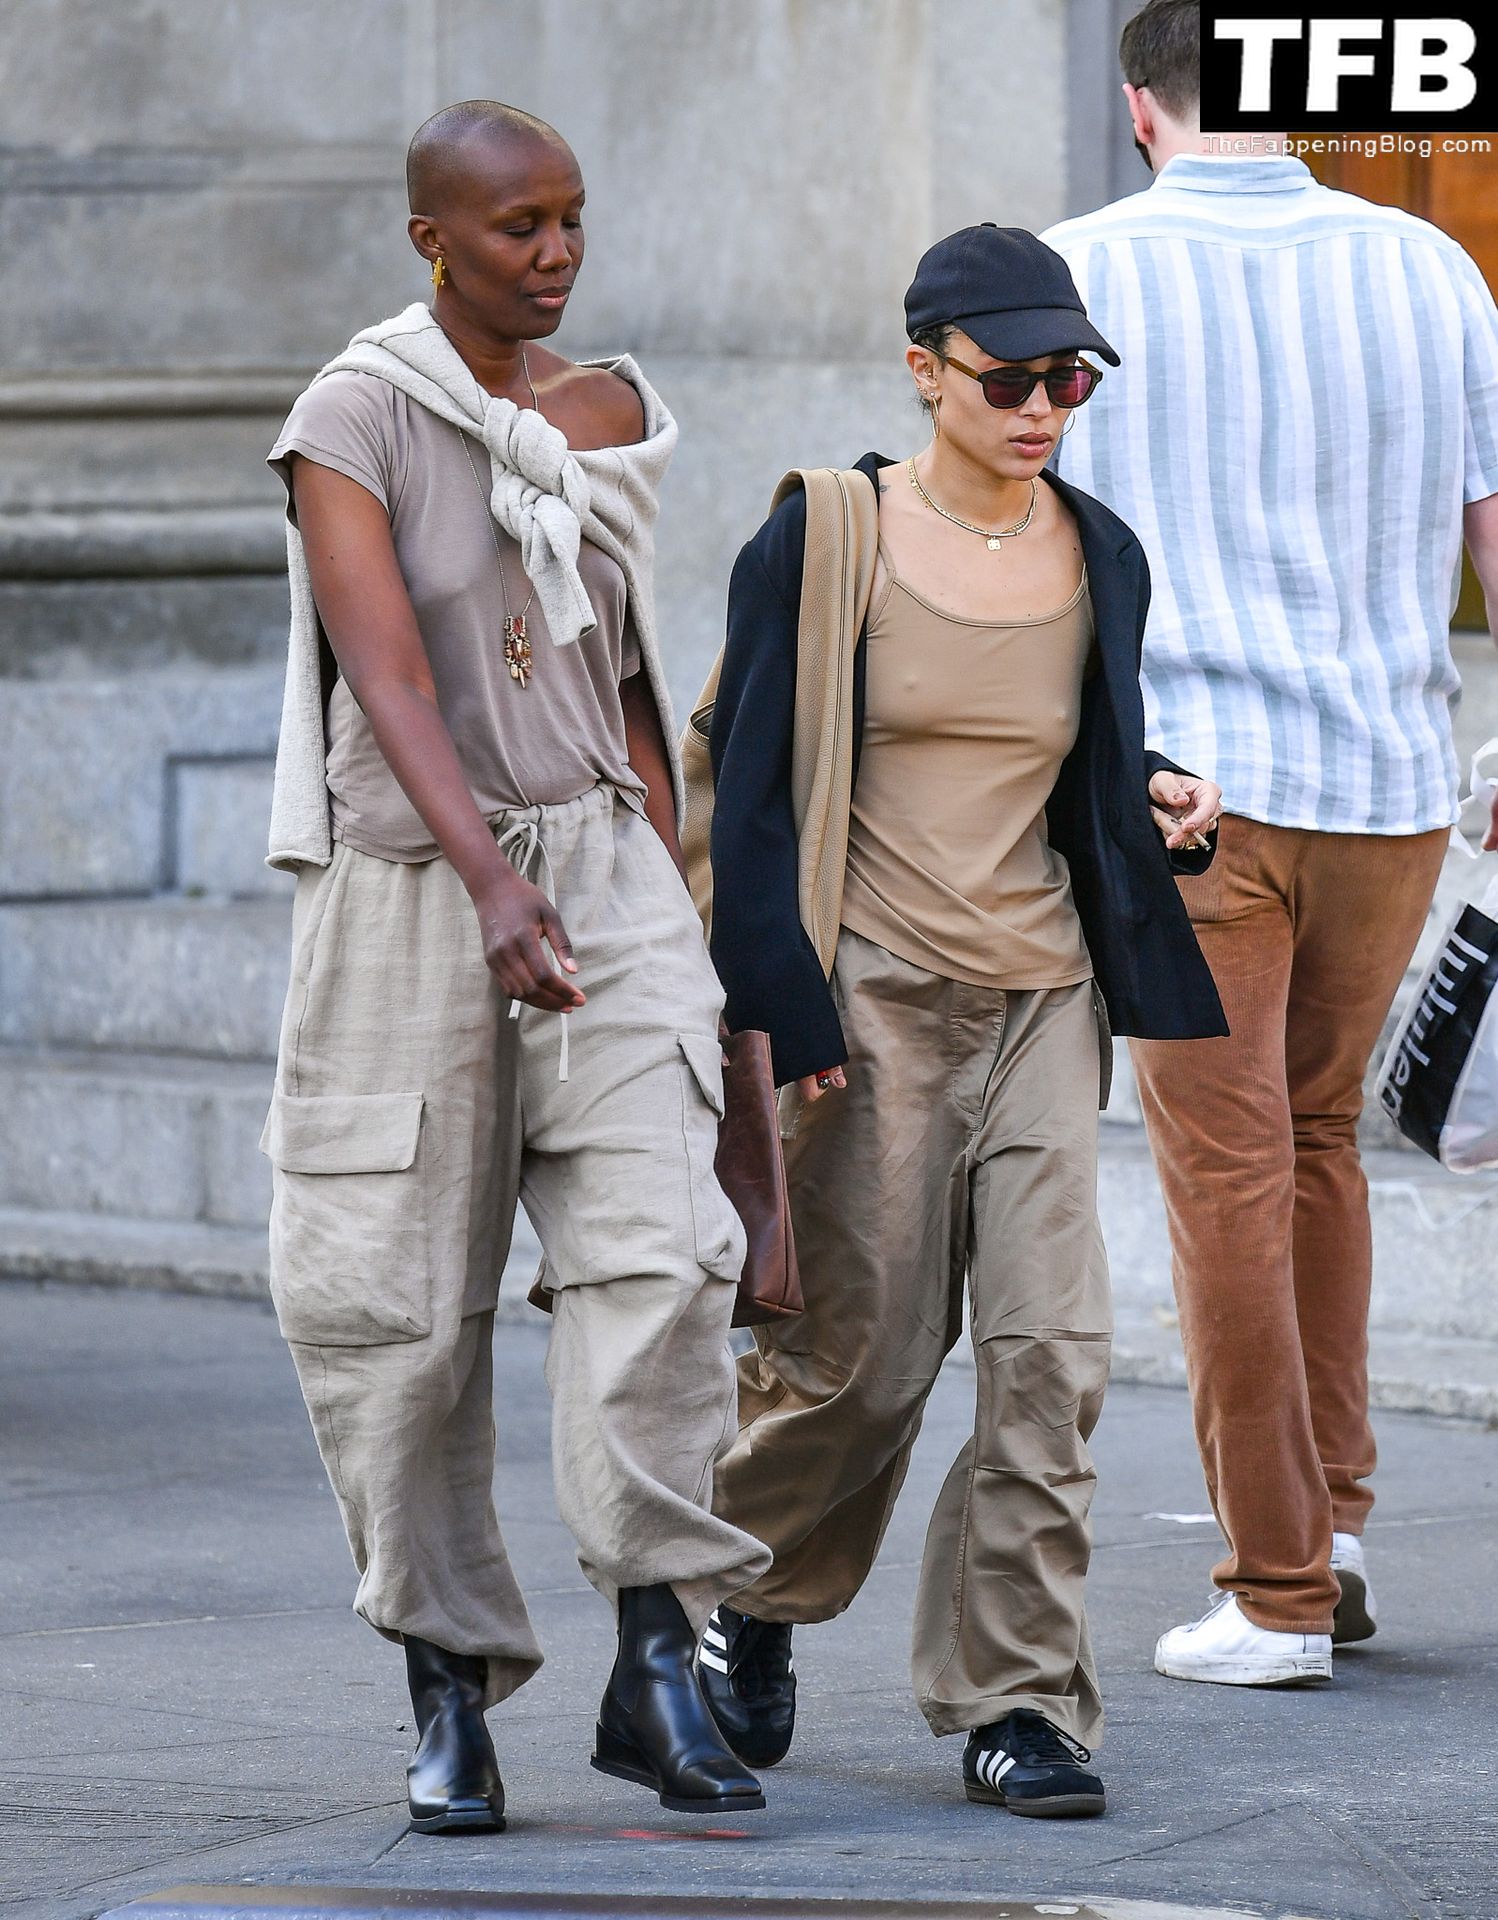 Zoe Kravitz Sexy Tits The Fappening Blog 10 - Braless Zoe Kravitz Steps Out With a Friend in NYC (13 Photos)